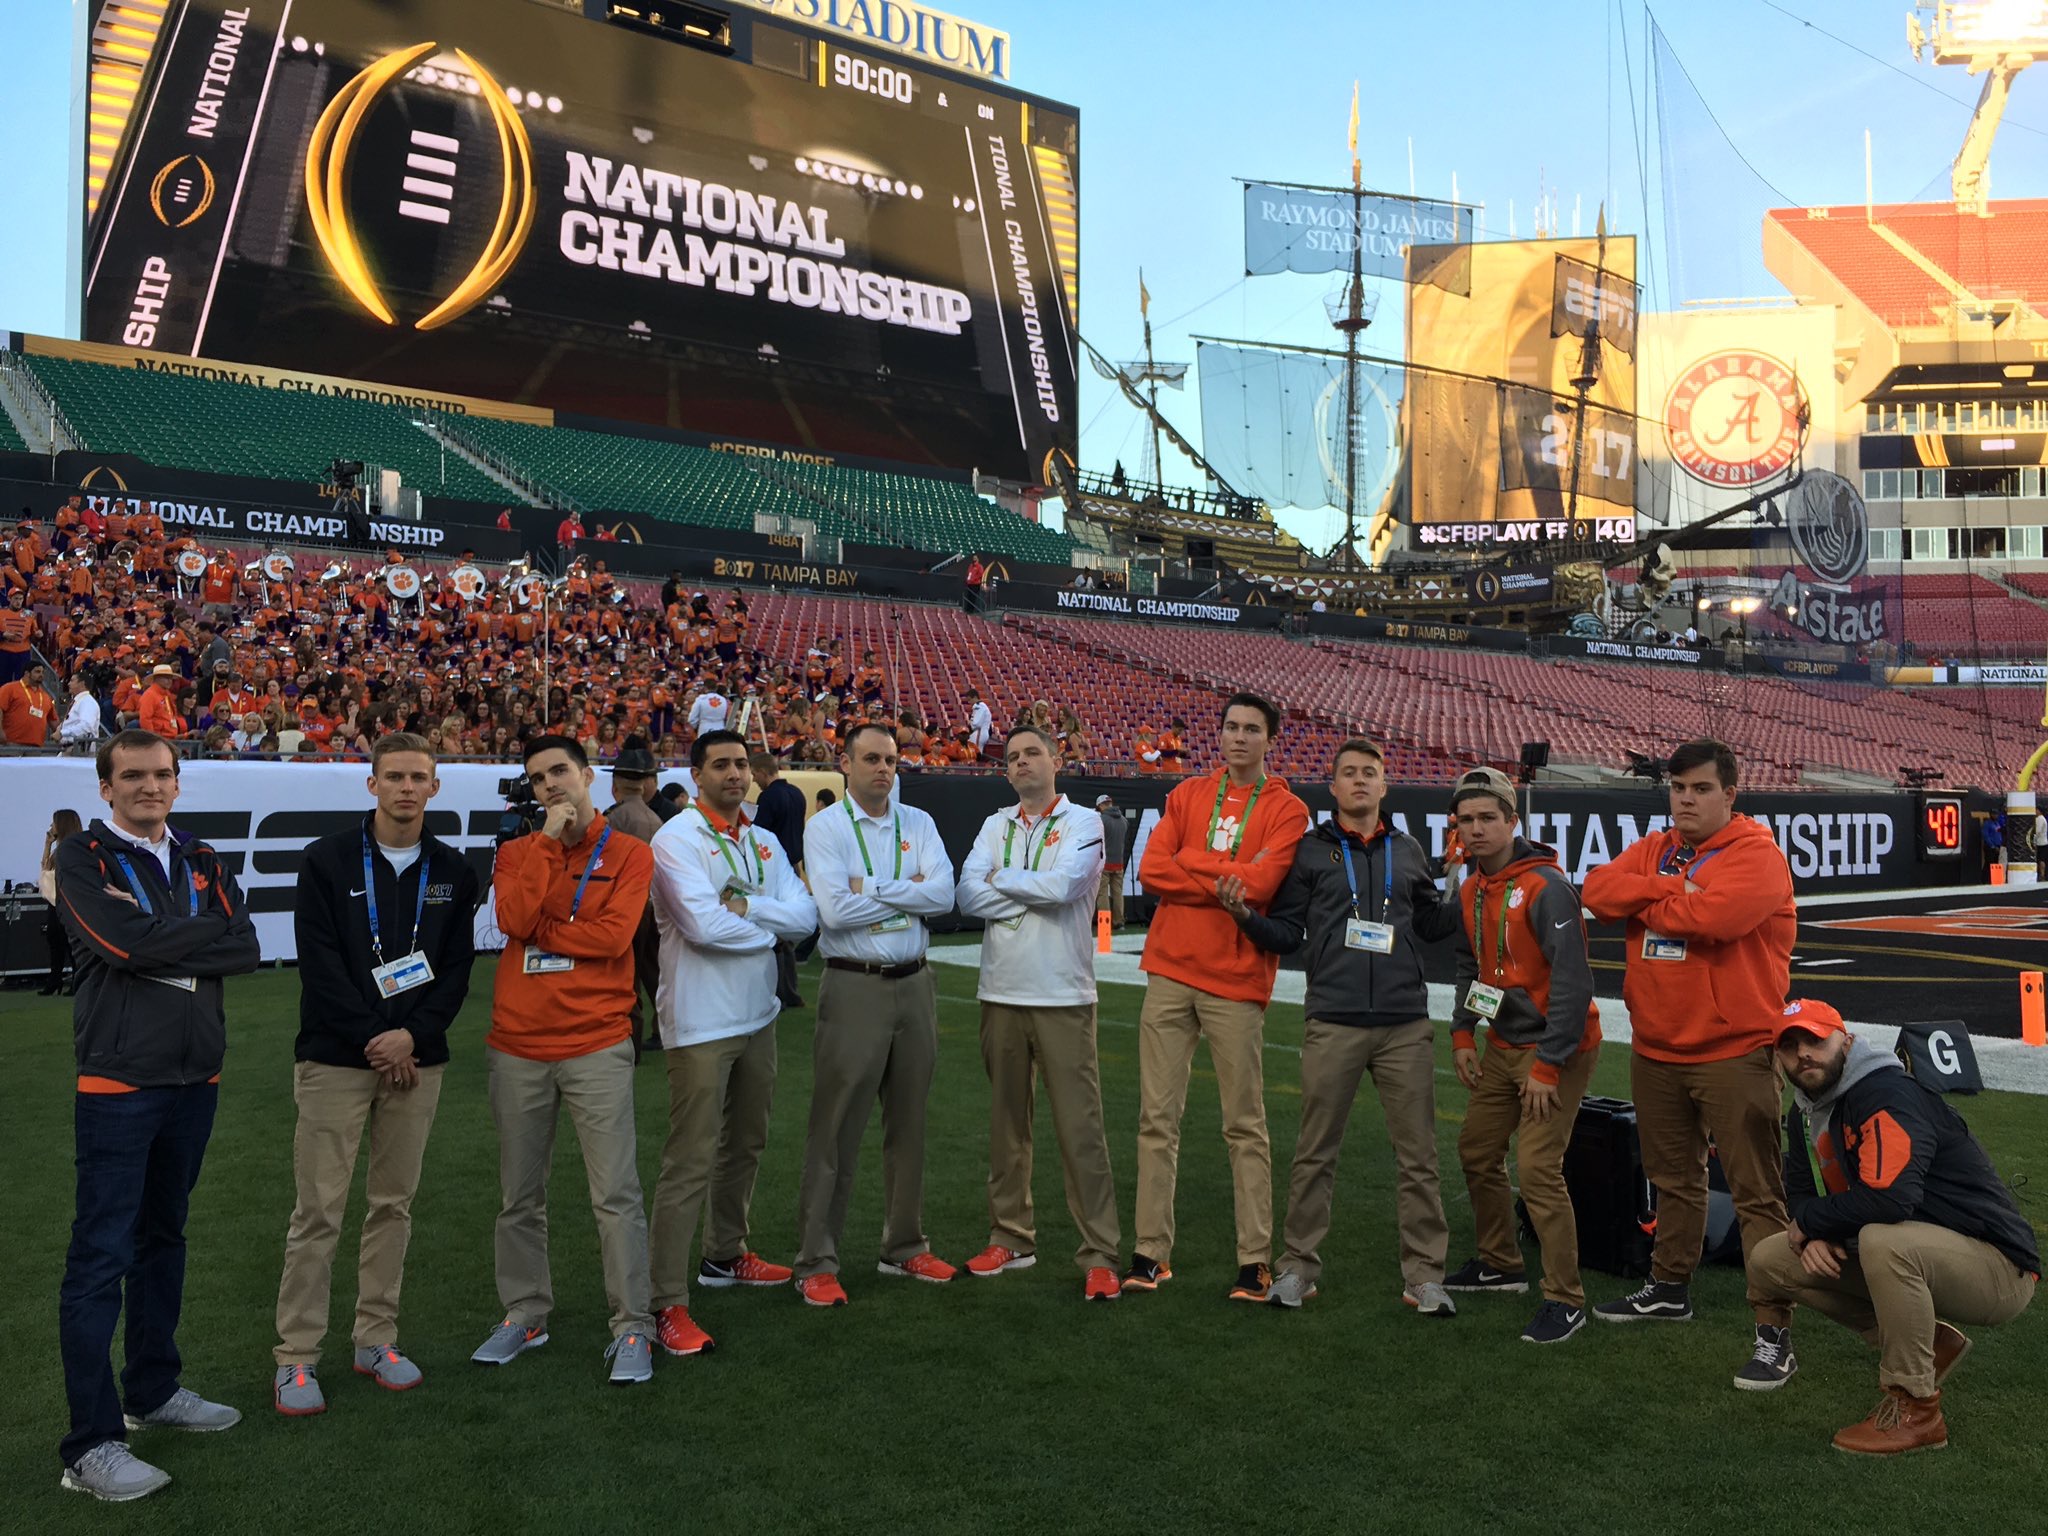 The Clemson media team produced a wealth of content, both live and produced, surround the Tigers' National Championship win in Tampa.